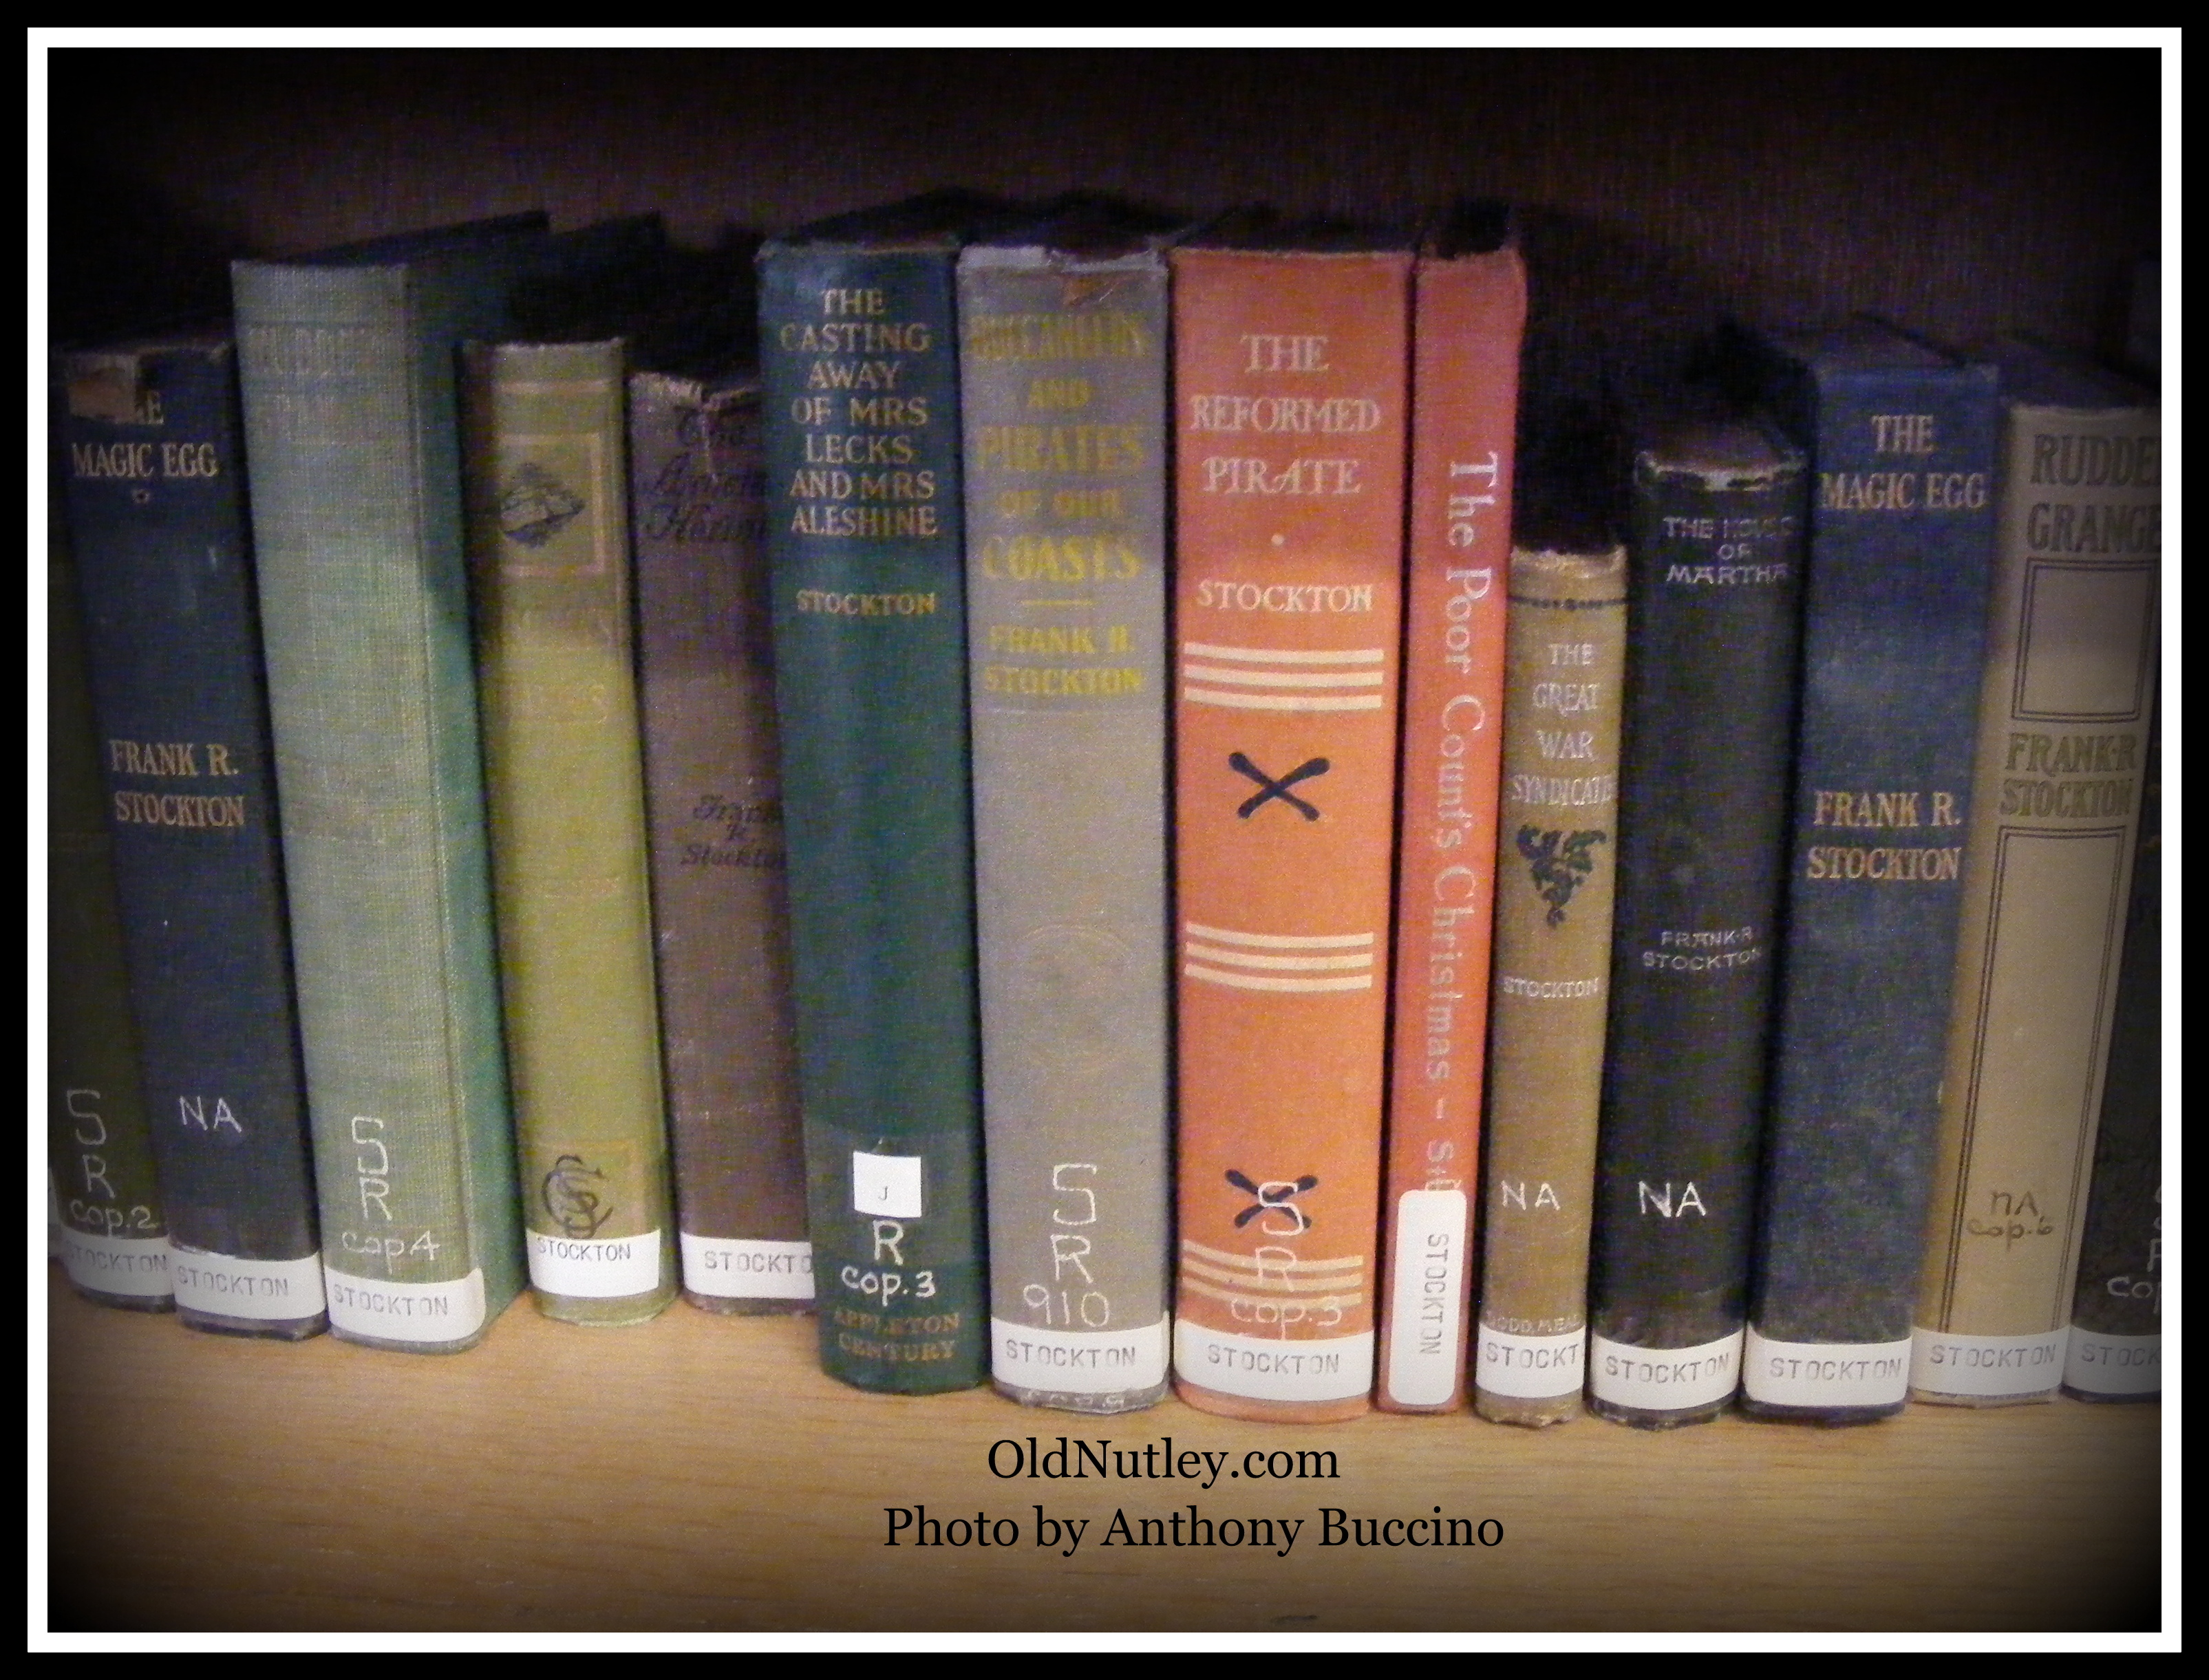 Frank Stockton book collection, Nutley Public Library, Anthony Buccino photo